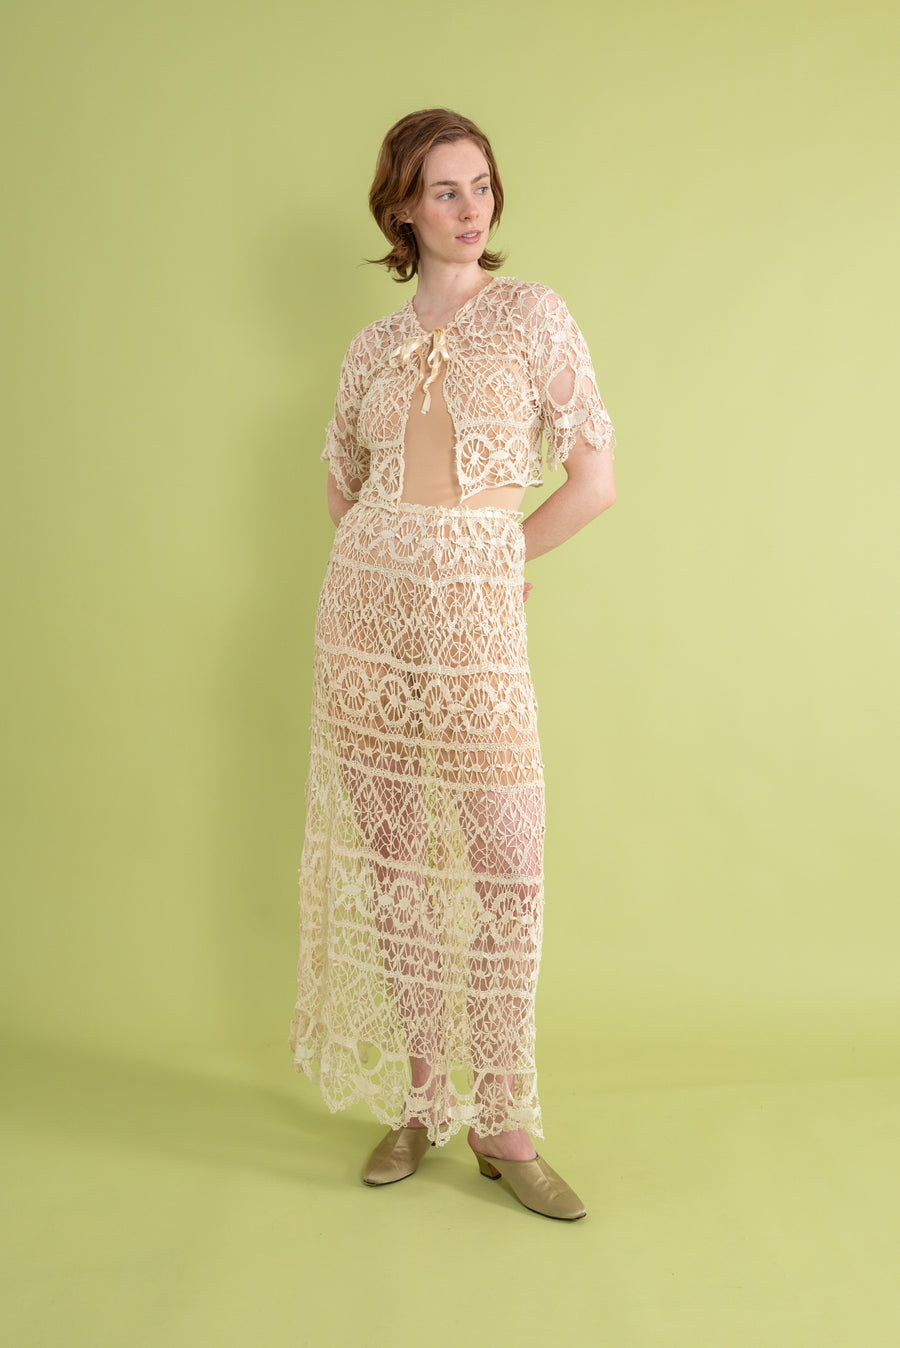 Edwardian Hand Tatted Lace 2 Piece Ensemble [OS]